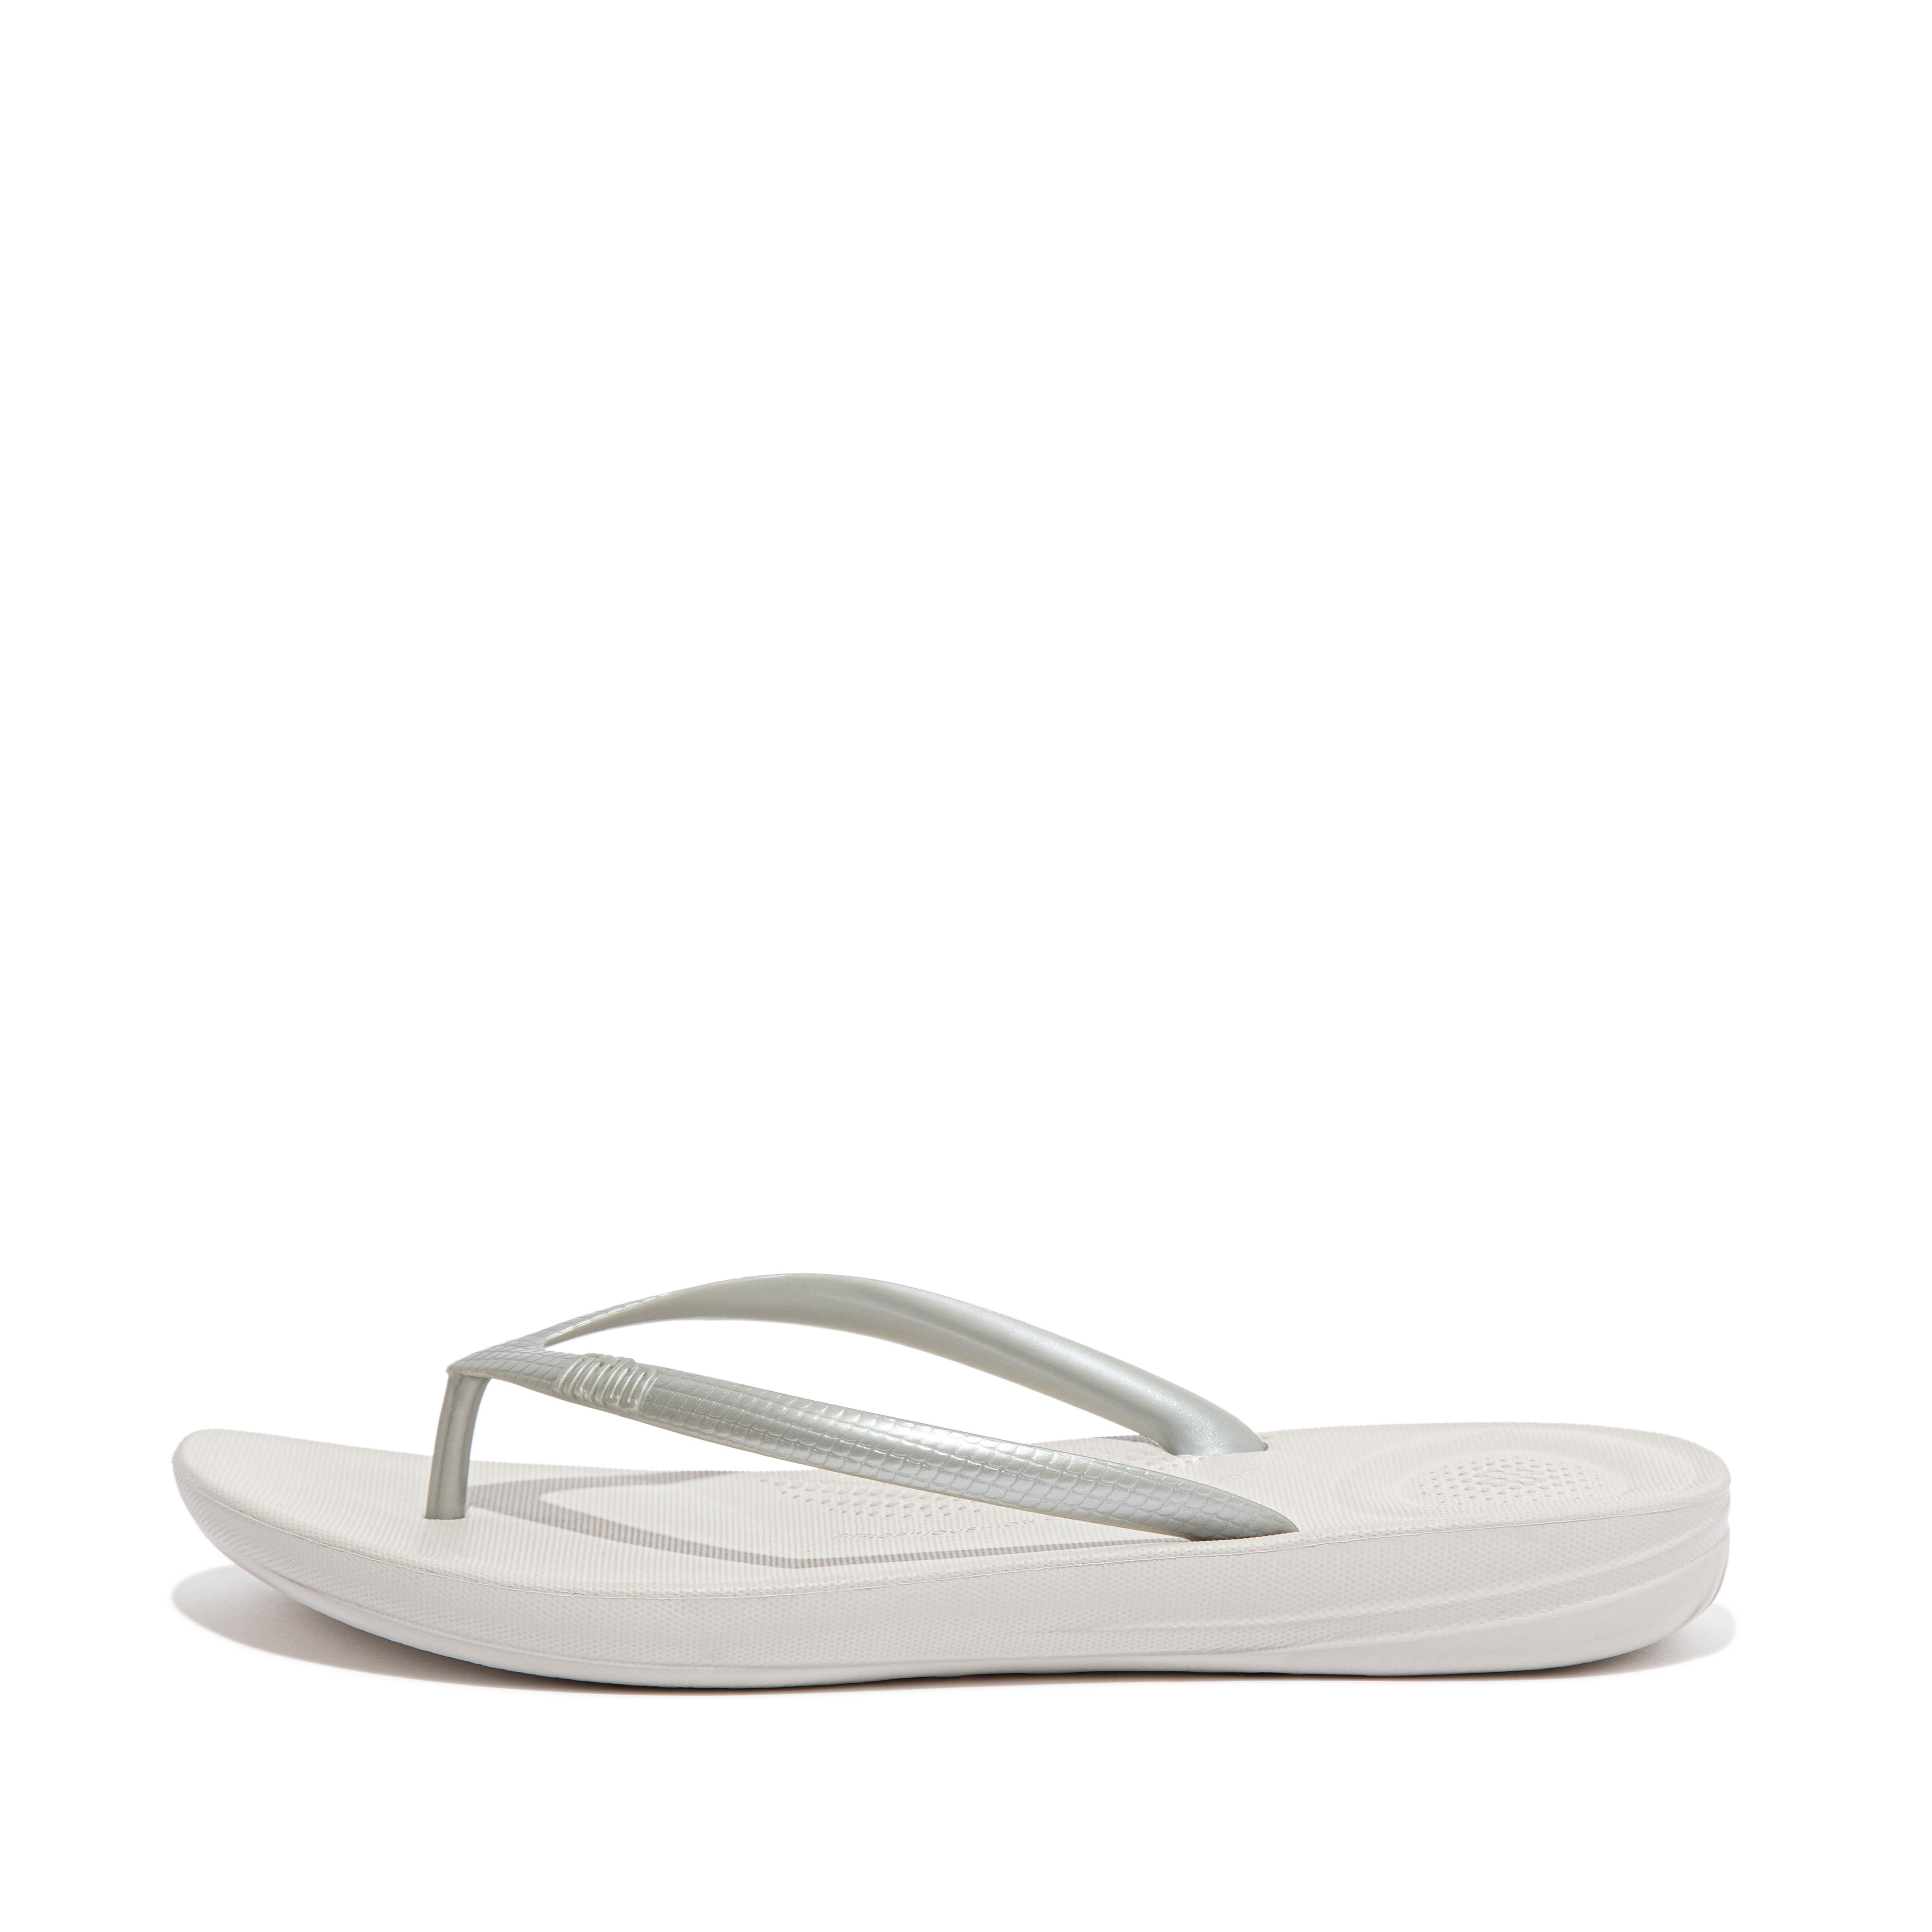 fitflop slippers for women